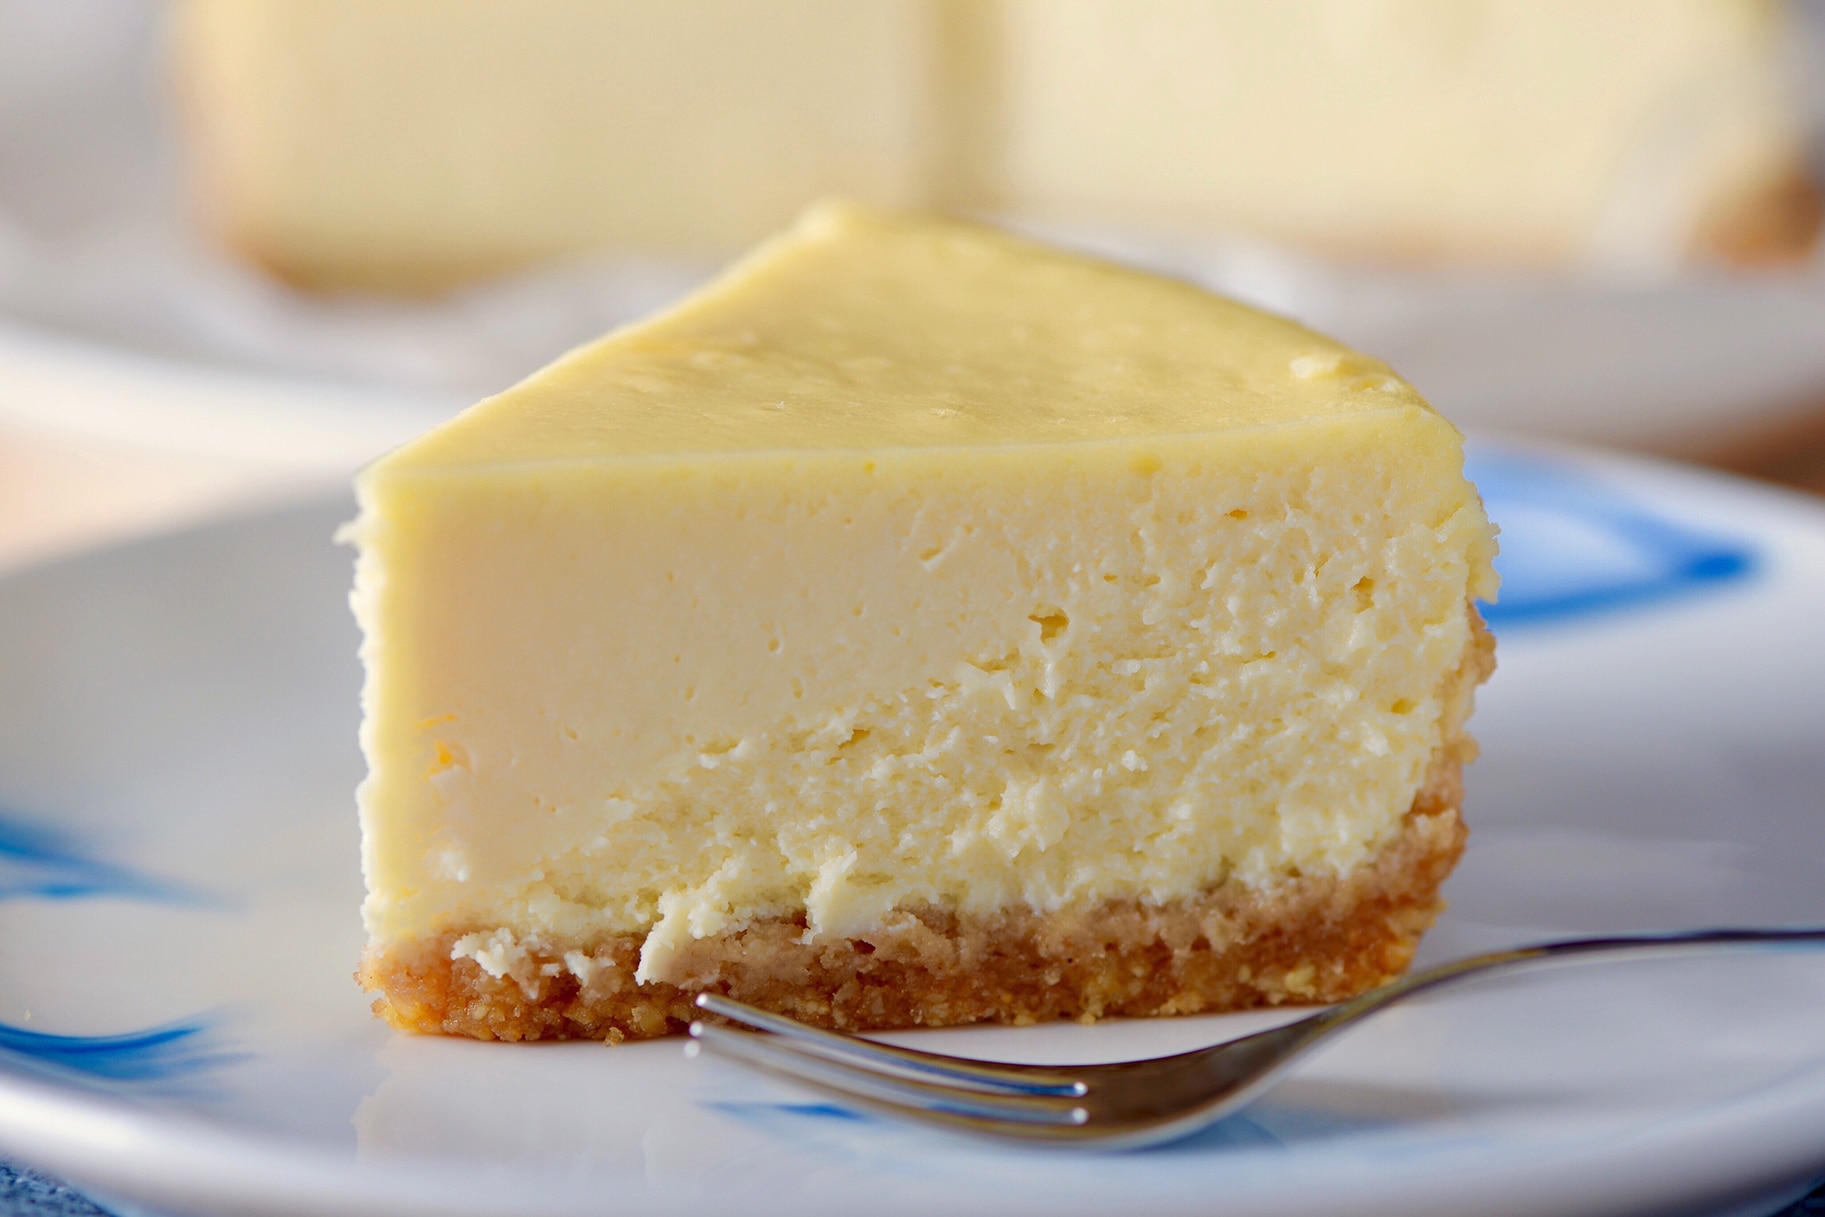 A stock image of Cheesecake